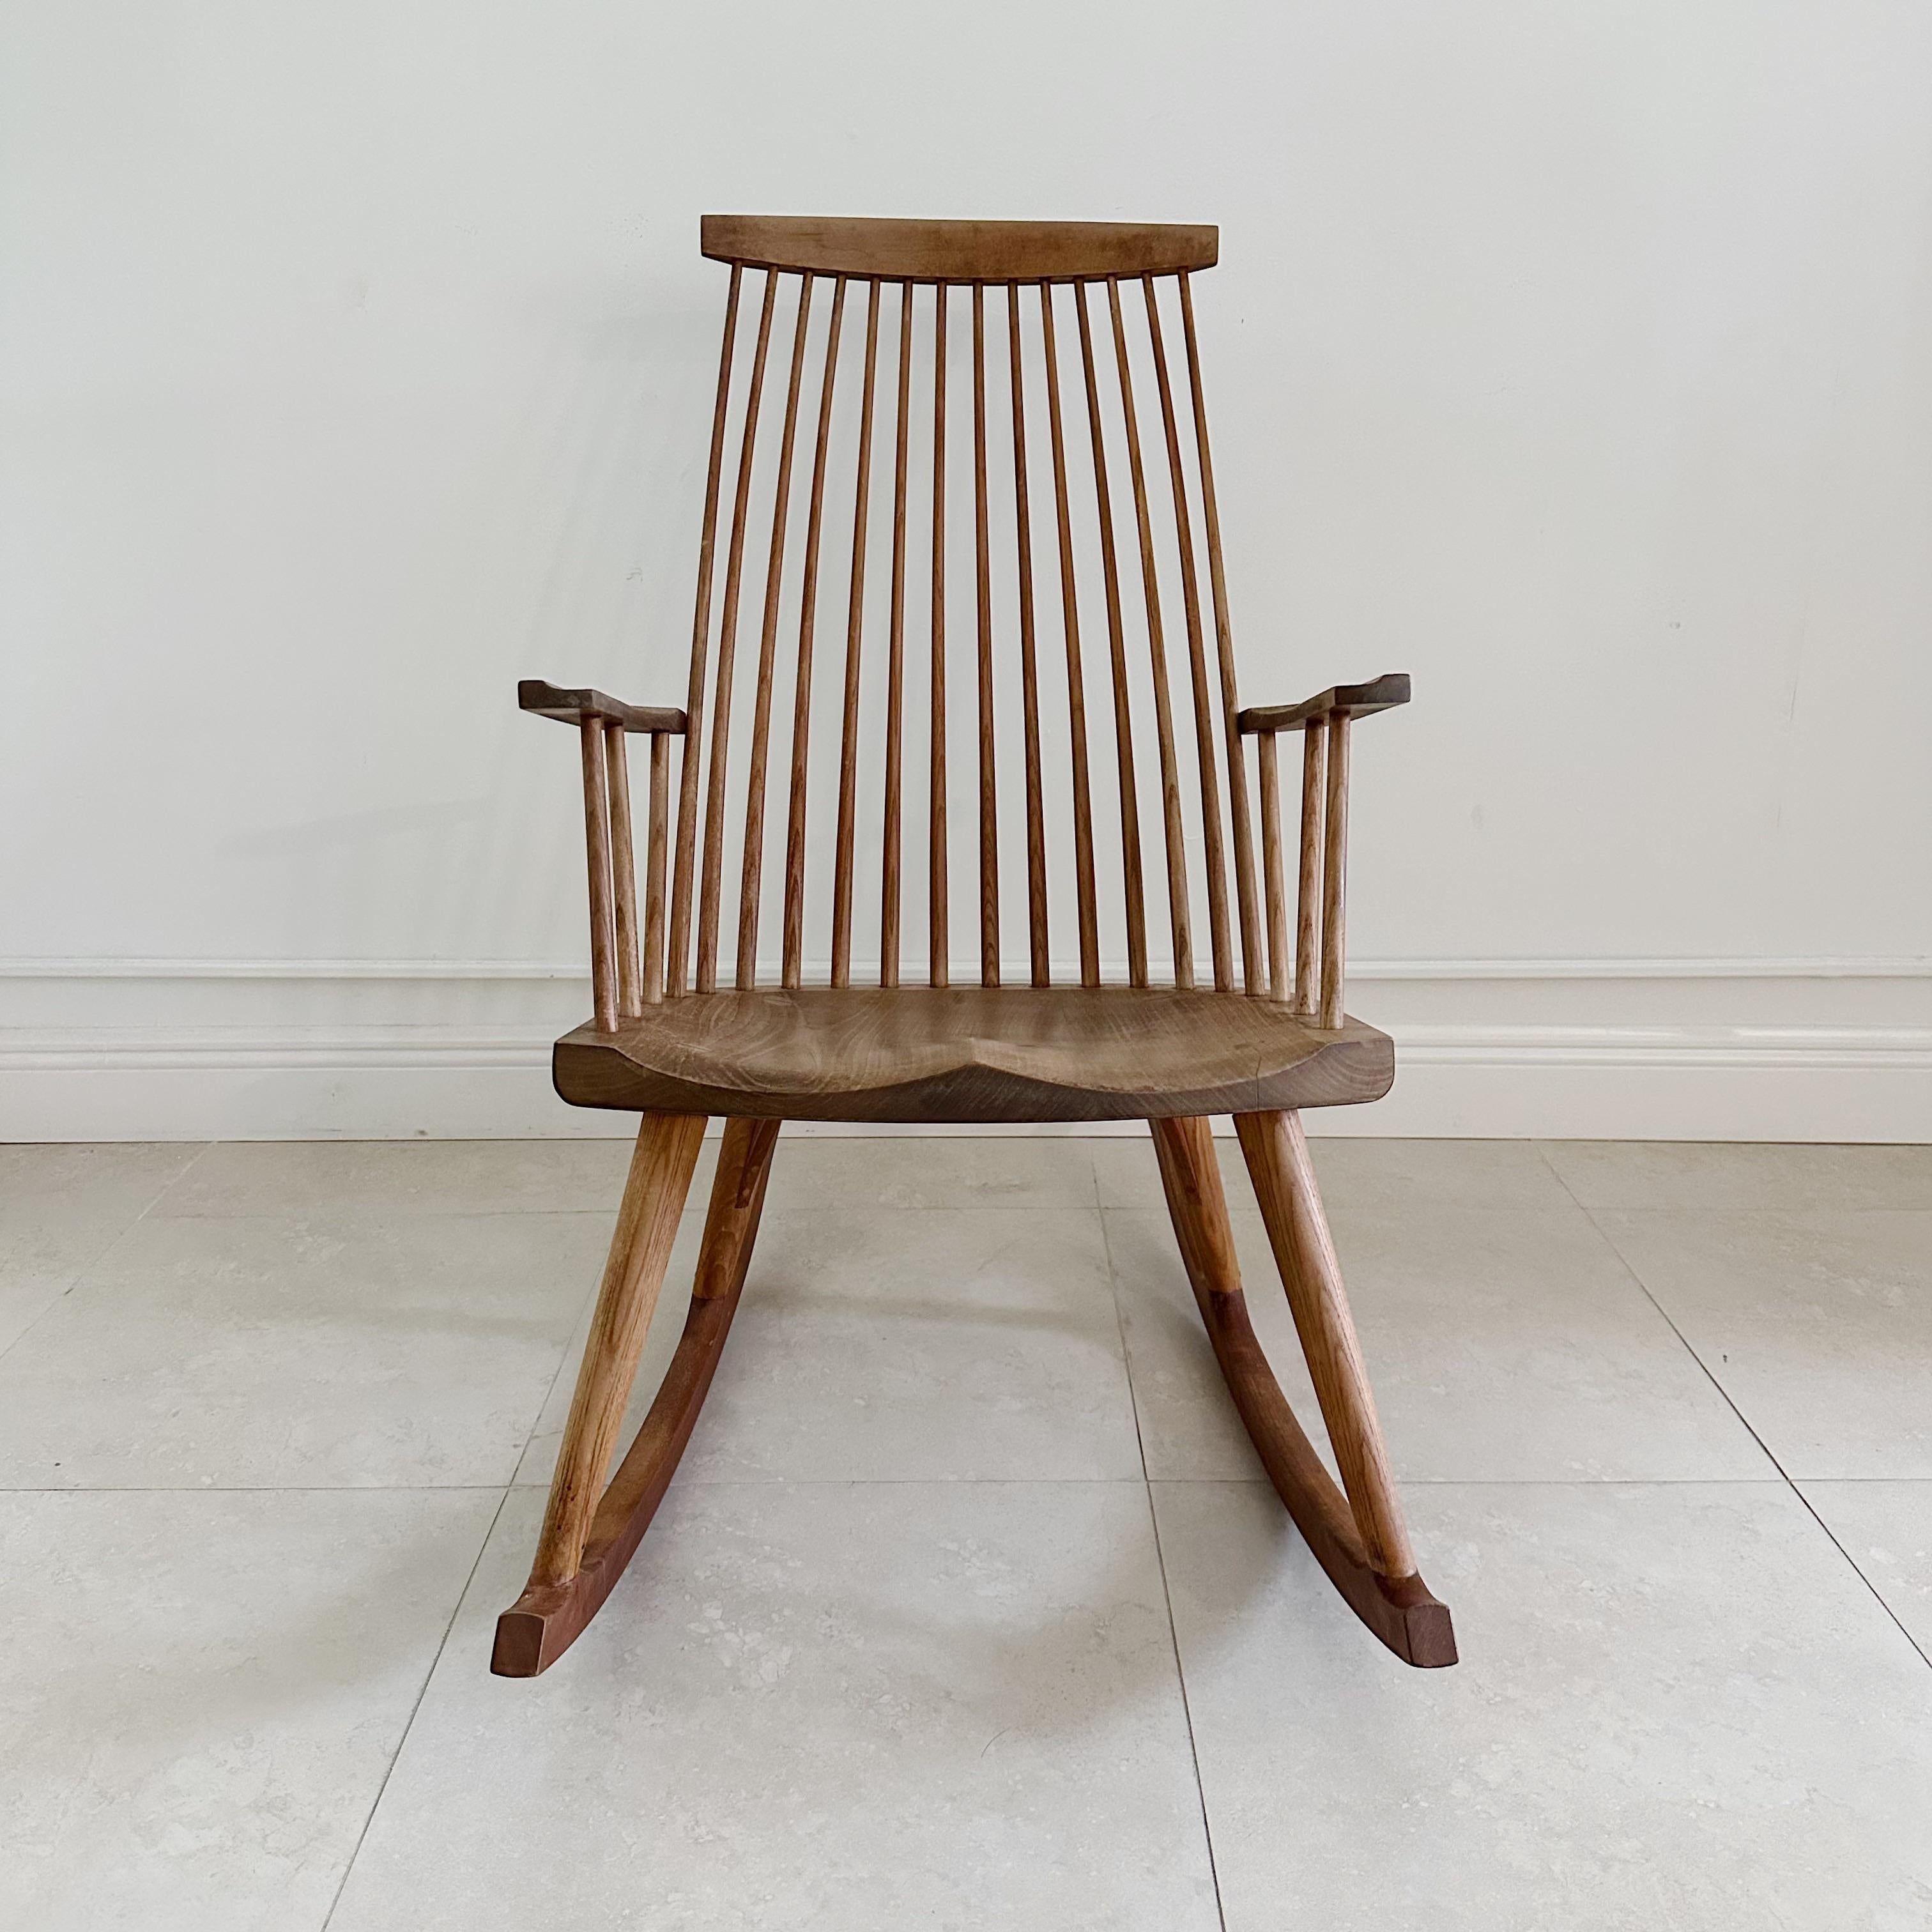 Thos Moser American Gloucester Rocker 1991

Vintage rocking chair by Thos Moser. Lightly worn with a beautiful matt patina. Signed in indelible India ink on the underside Moser Cabinetmakers, Auburn Maine, Joe Pepin 1991. Made in Thos Mosers first